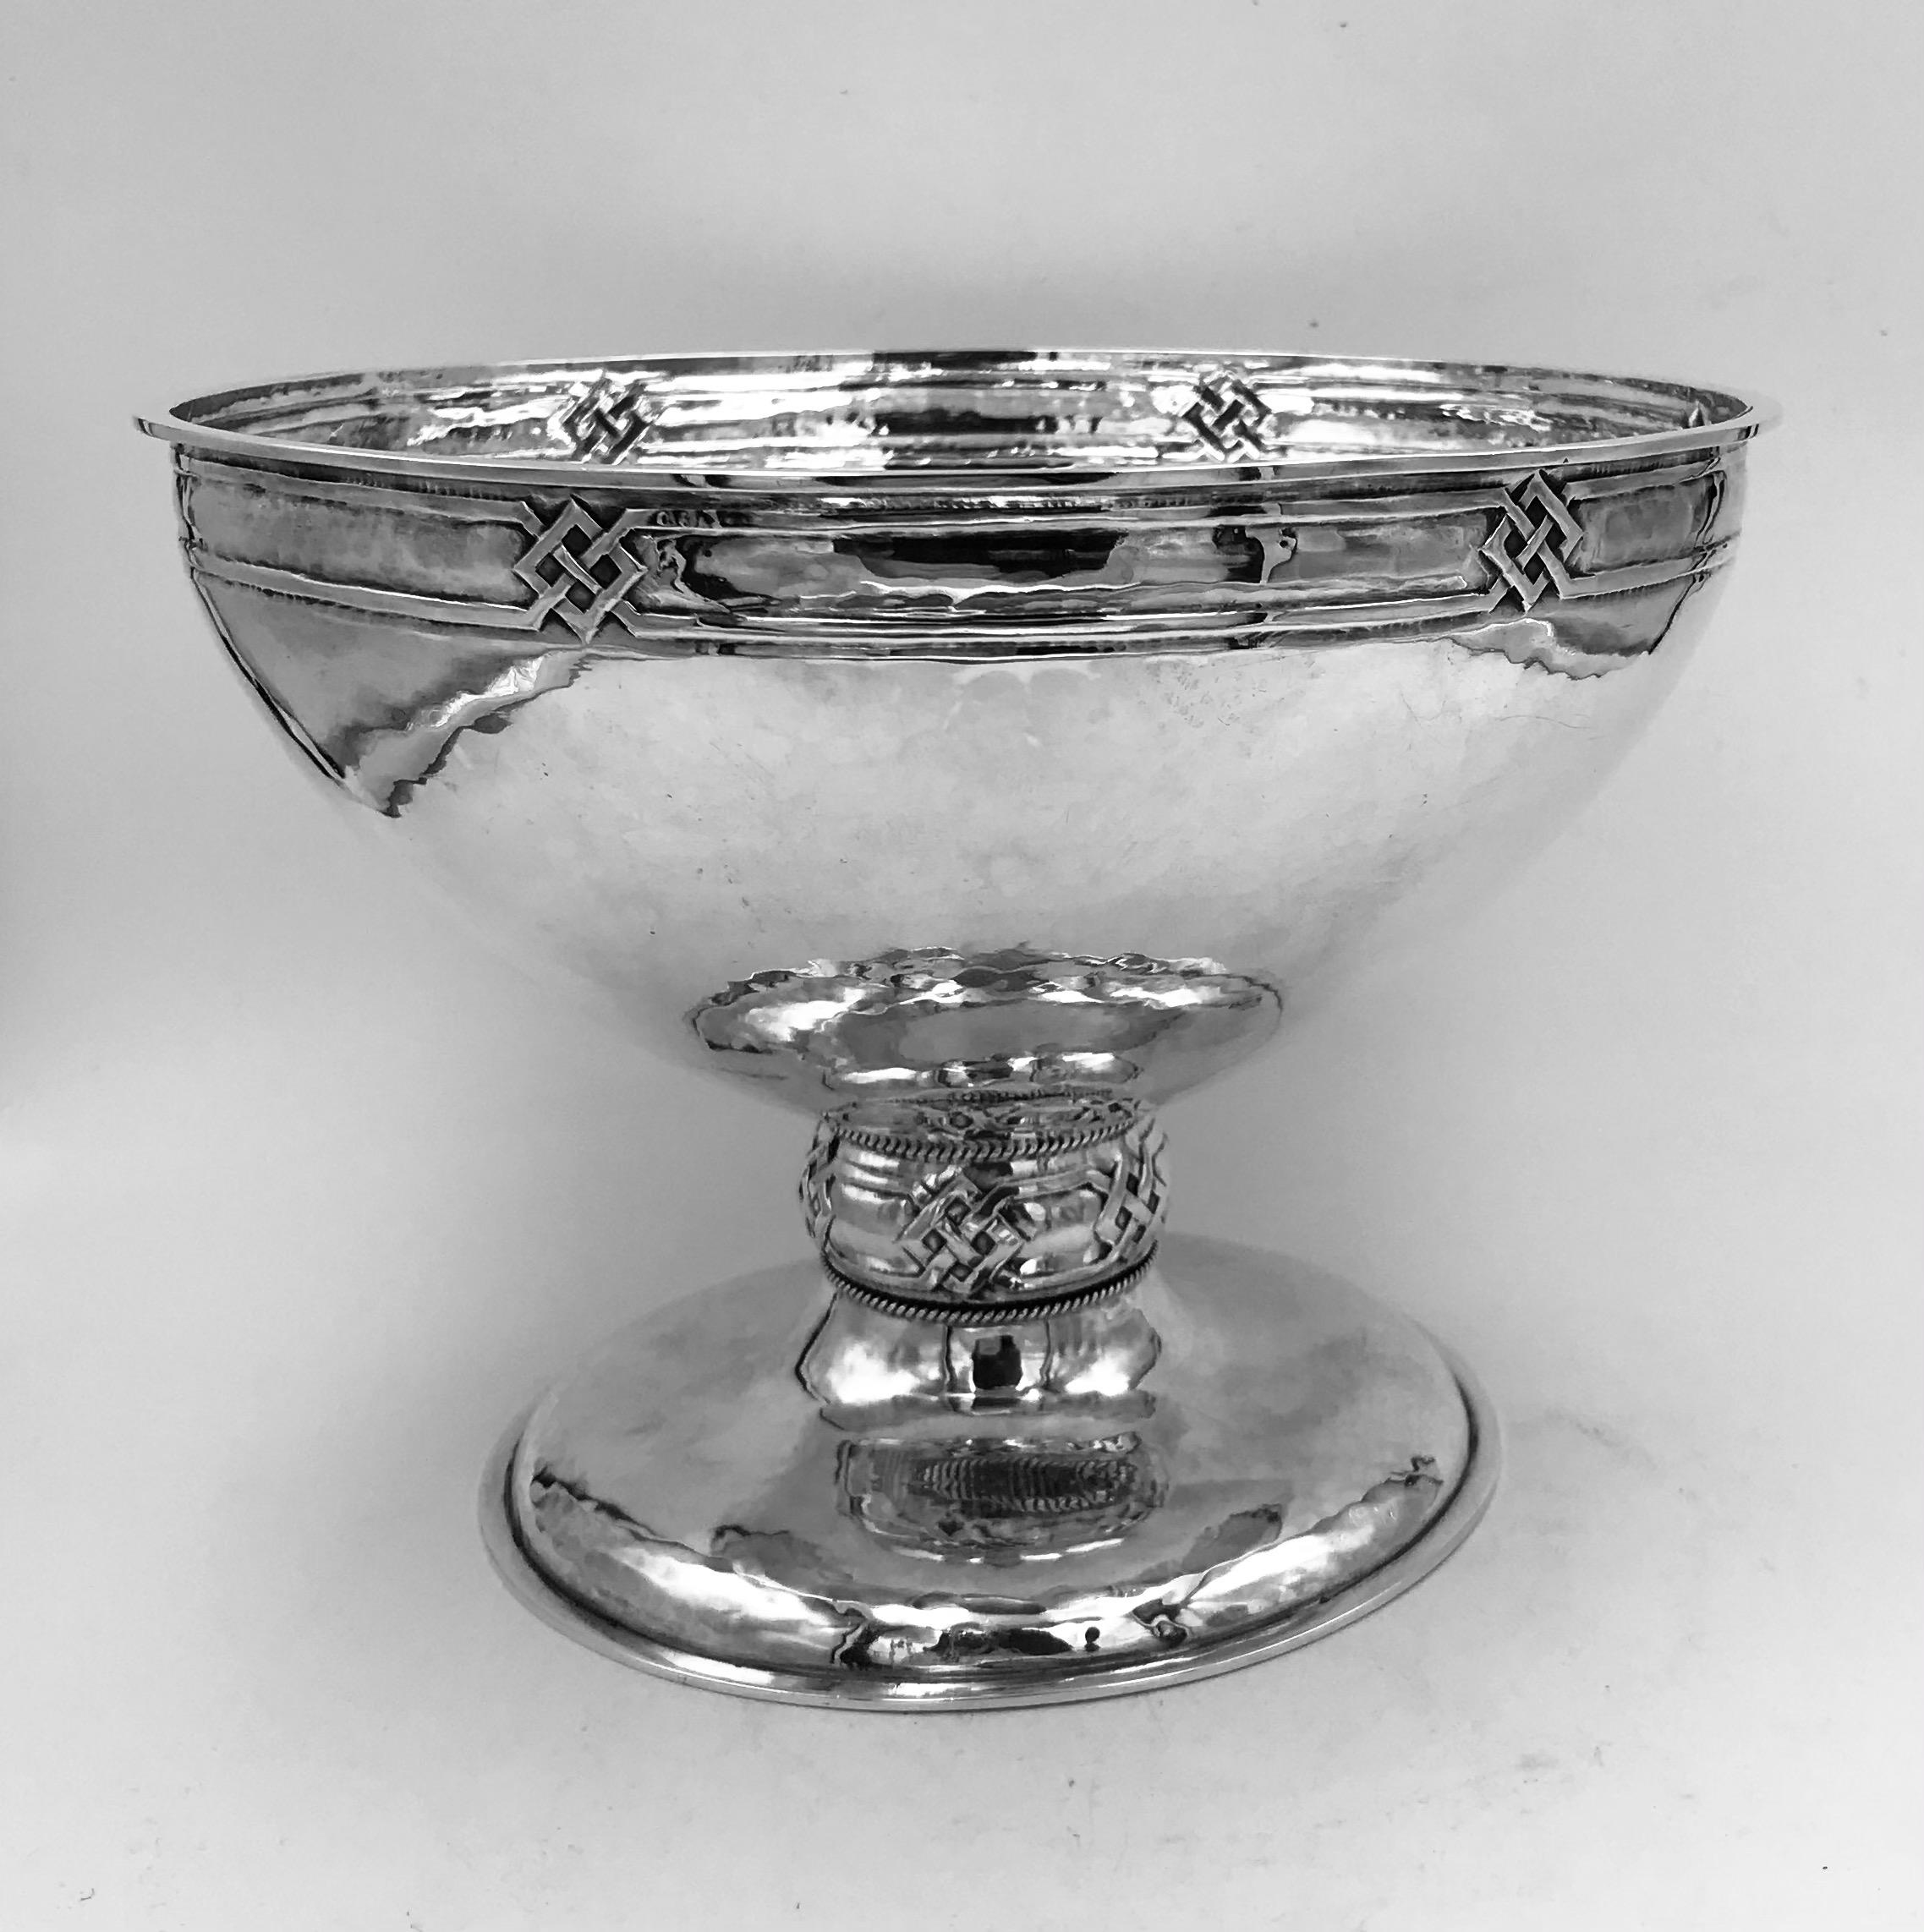 An antique sterling silver Arts & Crafts bowl made by A.E.Jones, Birmingham, England, 1910.
This very stylish bowl has a hammered texture finish and Celtic knot design to the border and stem, in keeping with its arts & crafts origins.